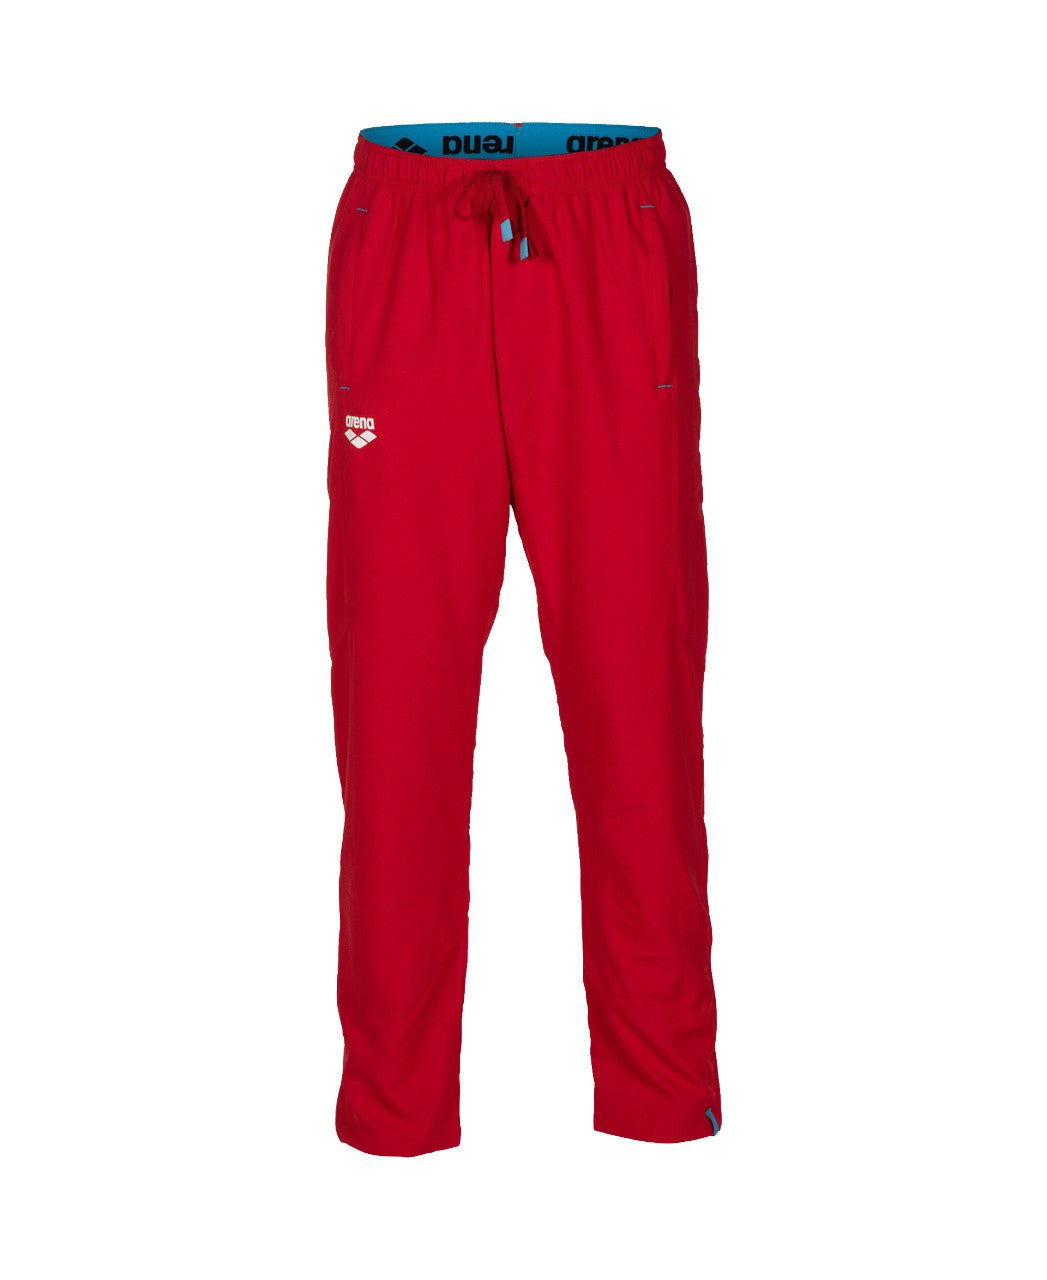 Team Pant Panel red